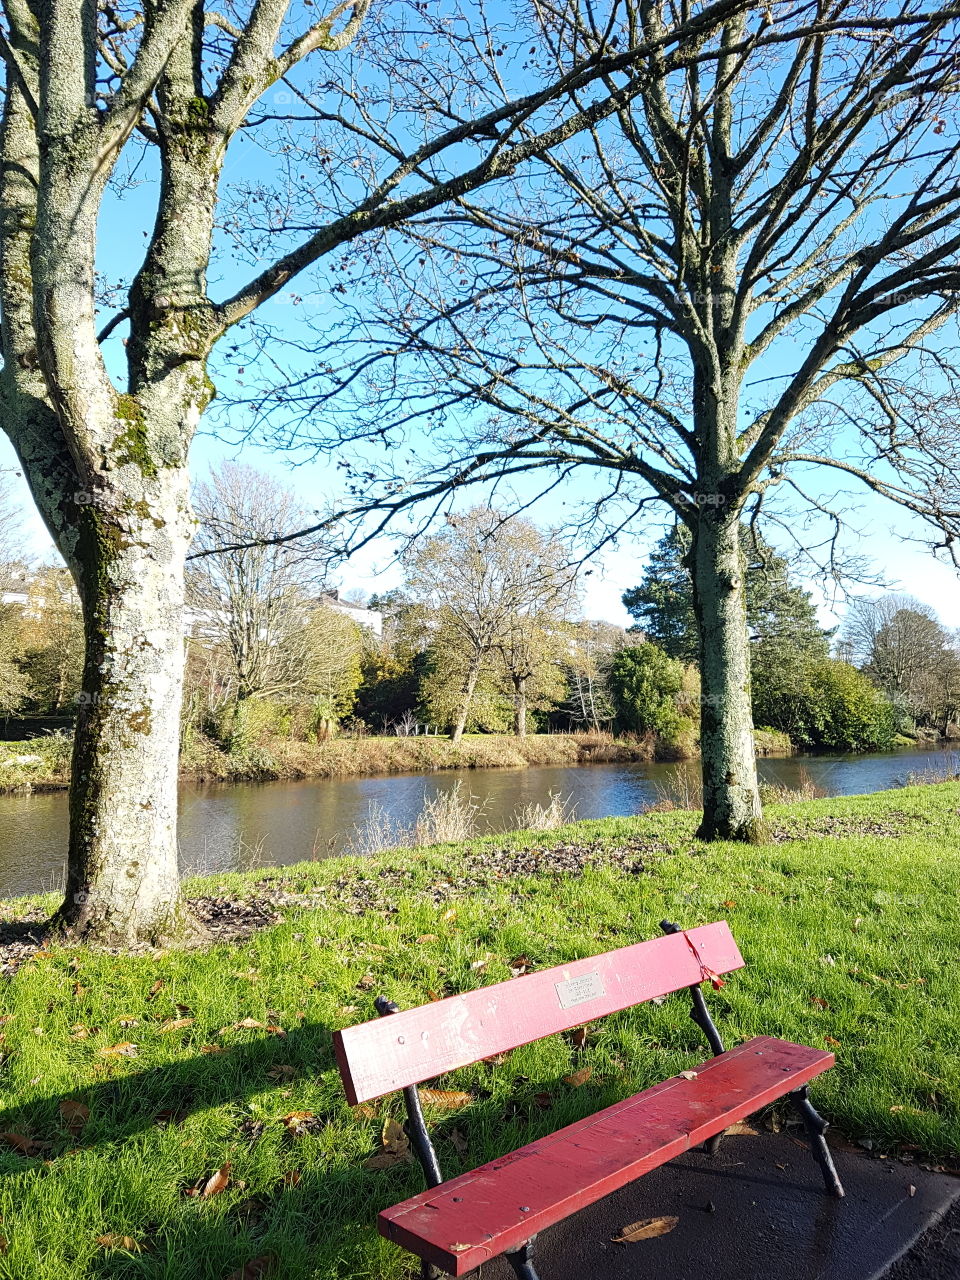 Bench, No Person, Park, Tree, Nature